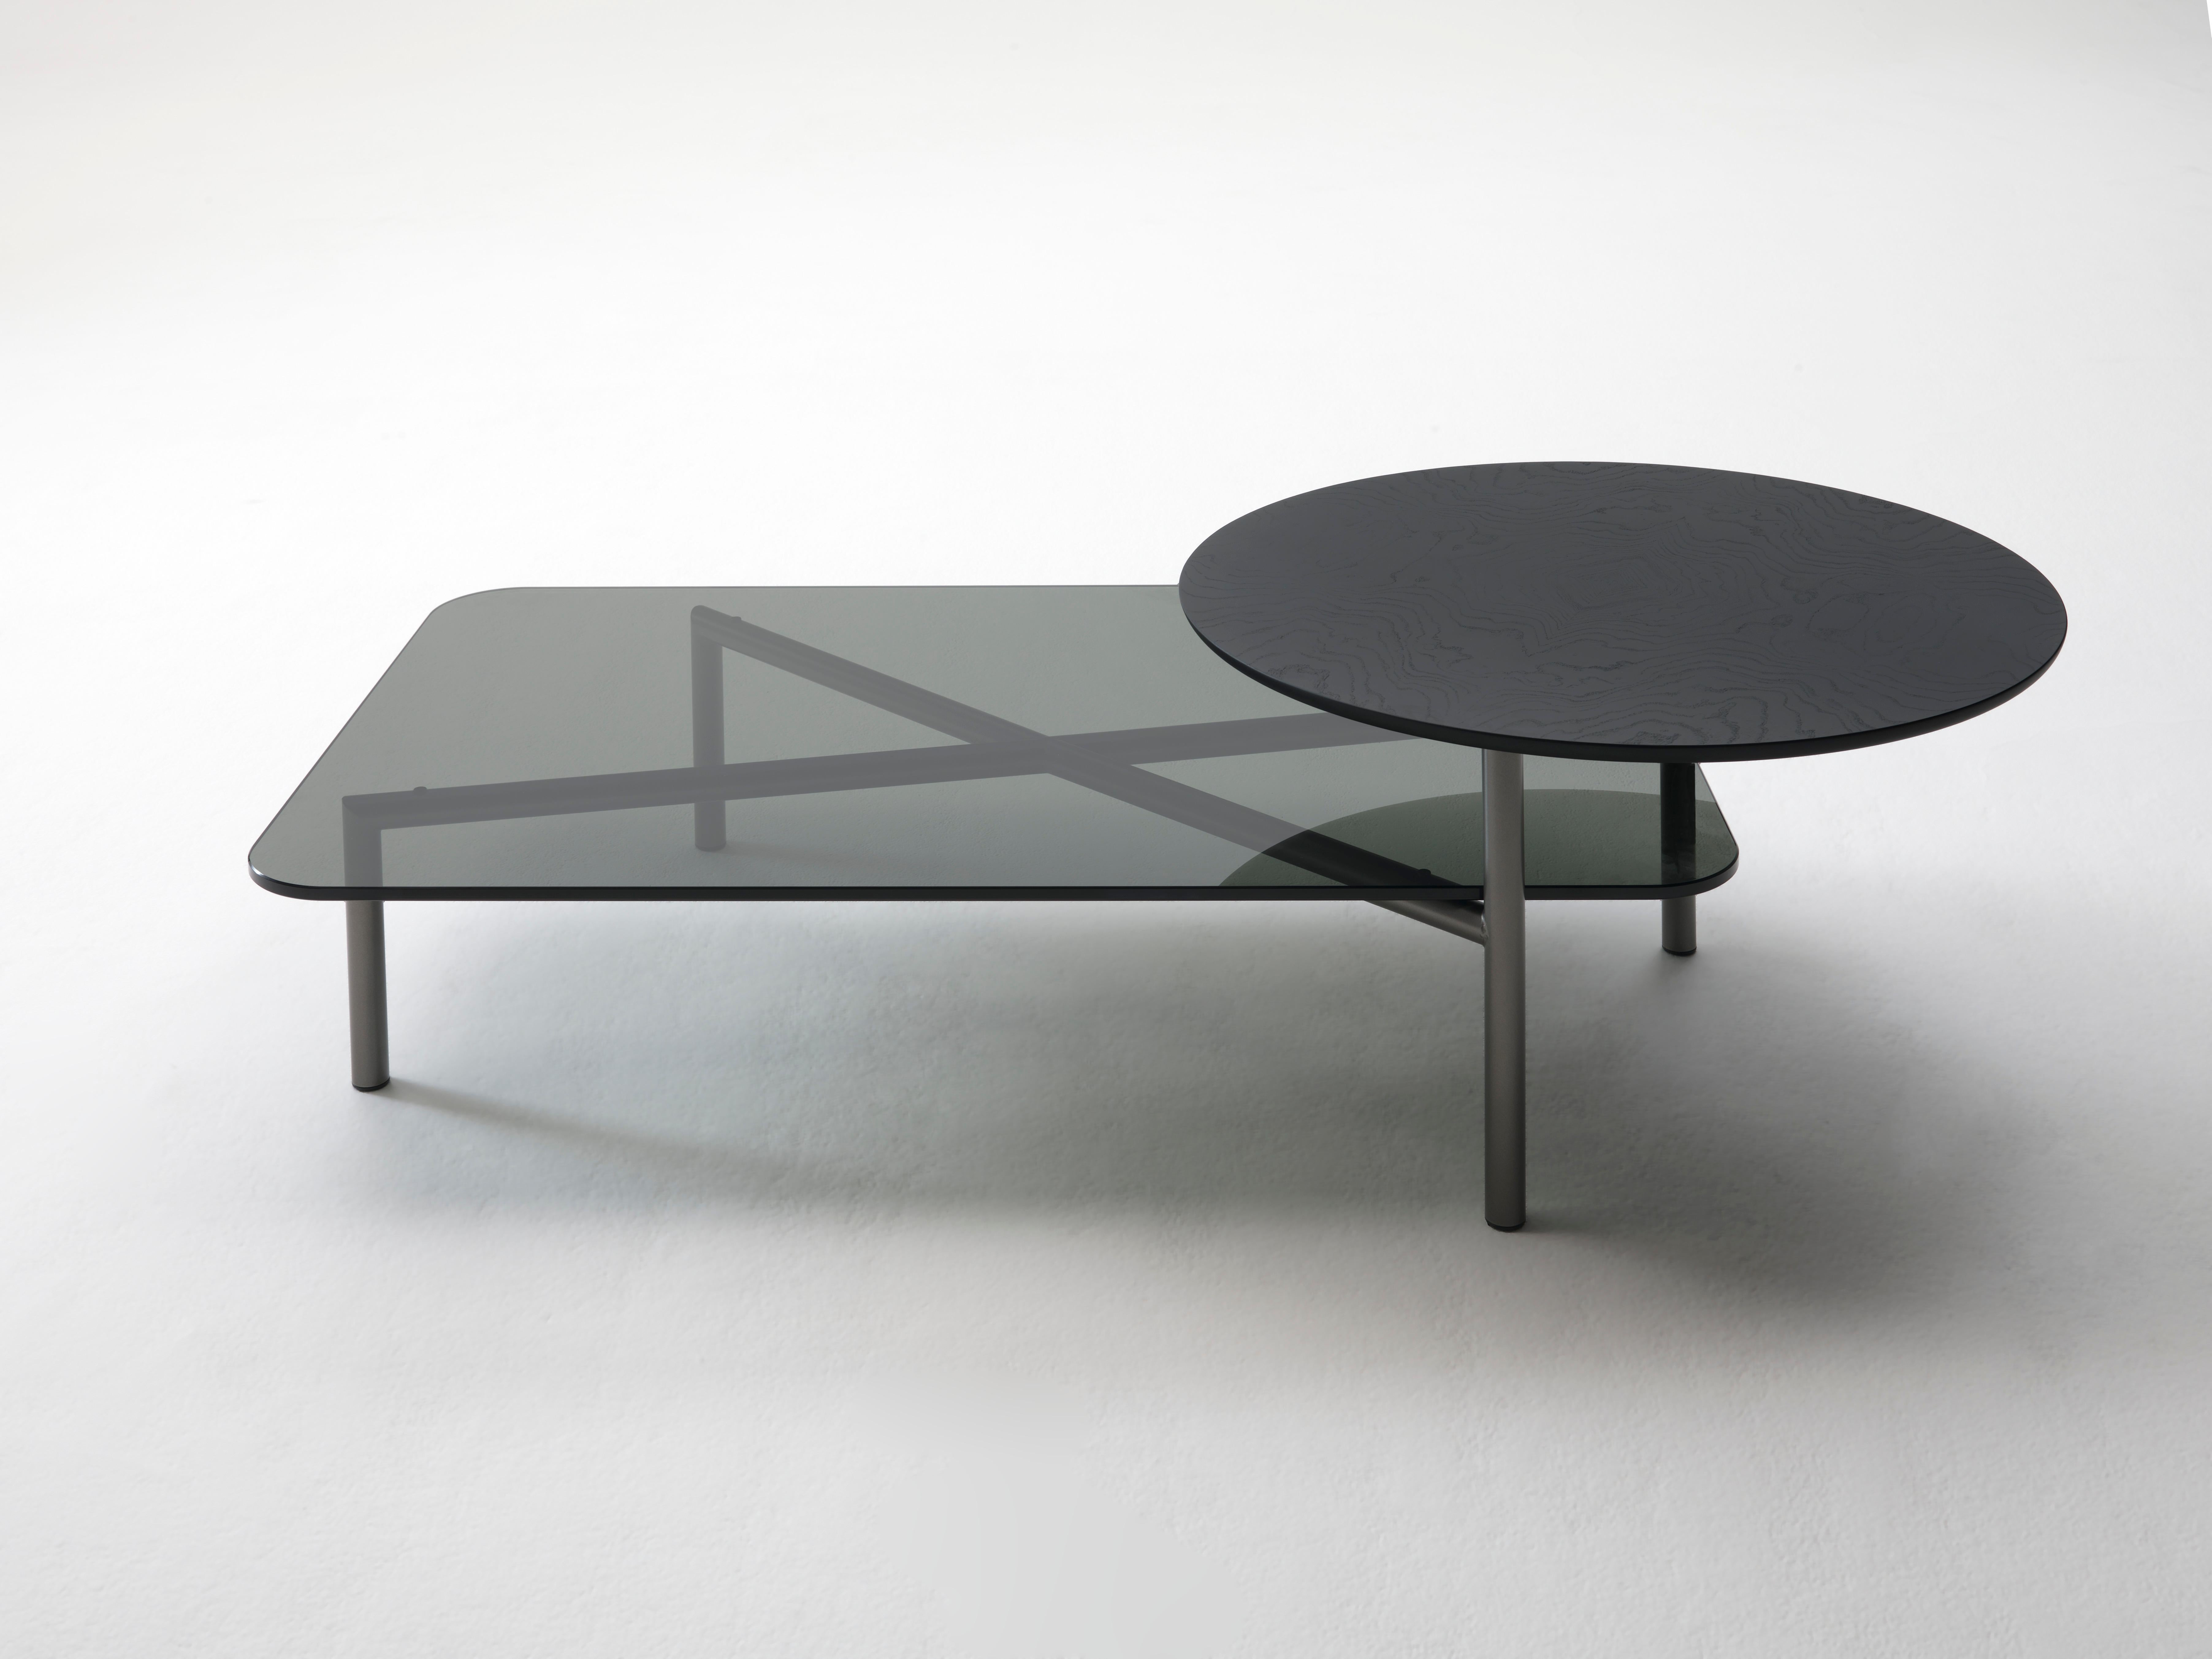 Smoked Glass Bitop coffee table by Rodolfo Dordoni
Materials: Base in bronze lacquered metal. 2 versions of tops: black Marquina marble, white Carrara marble, or gray smoked glass
Technique: Lacquered metal, polished marble. 
Dimensions: 140 x 85